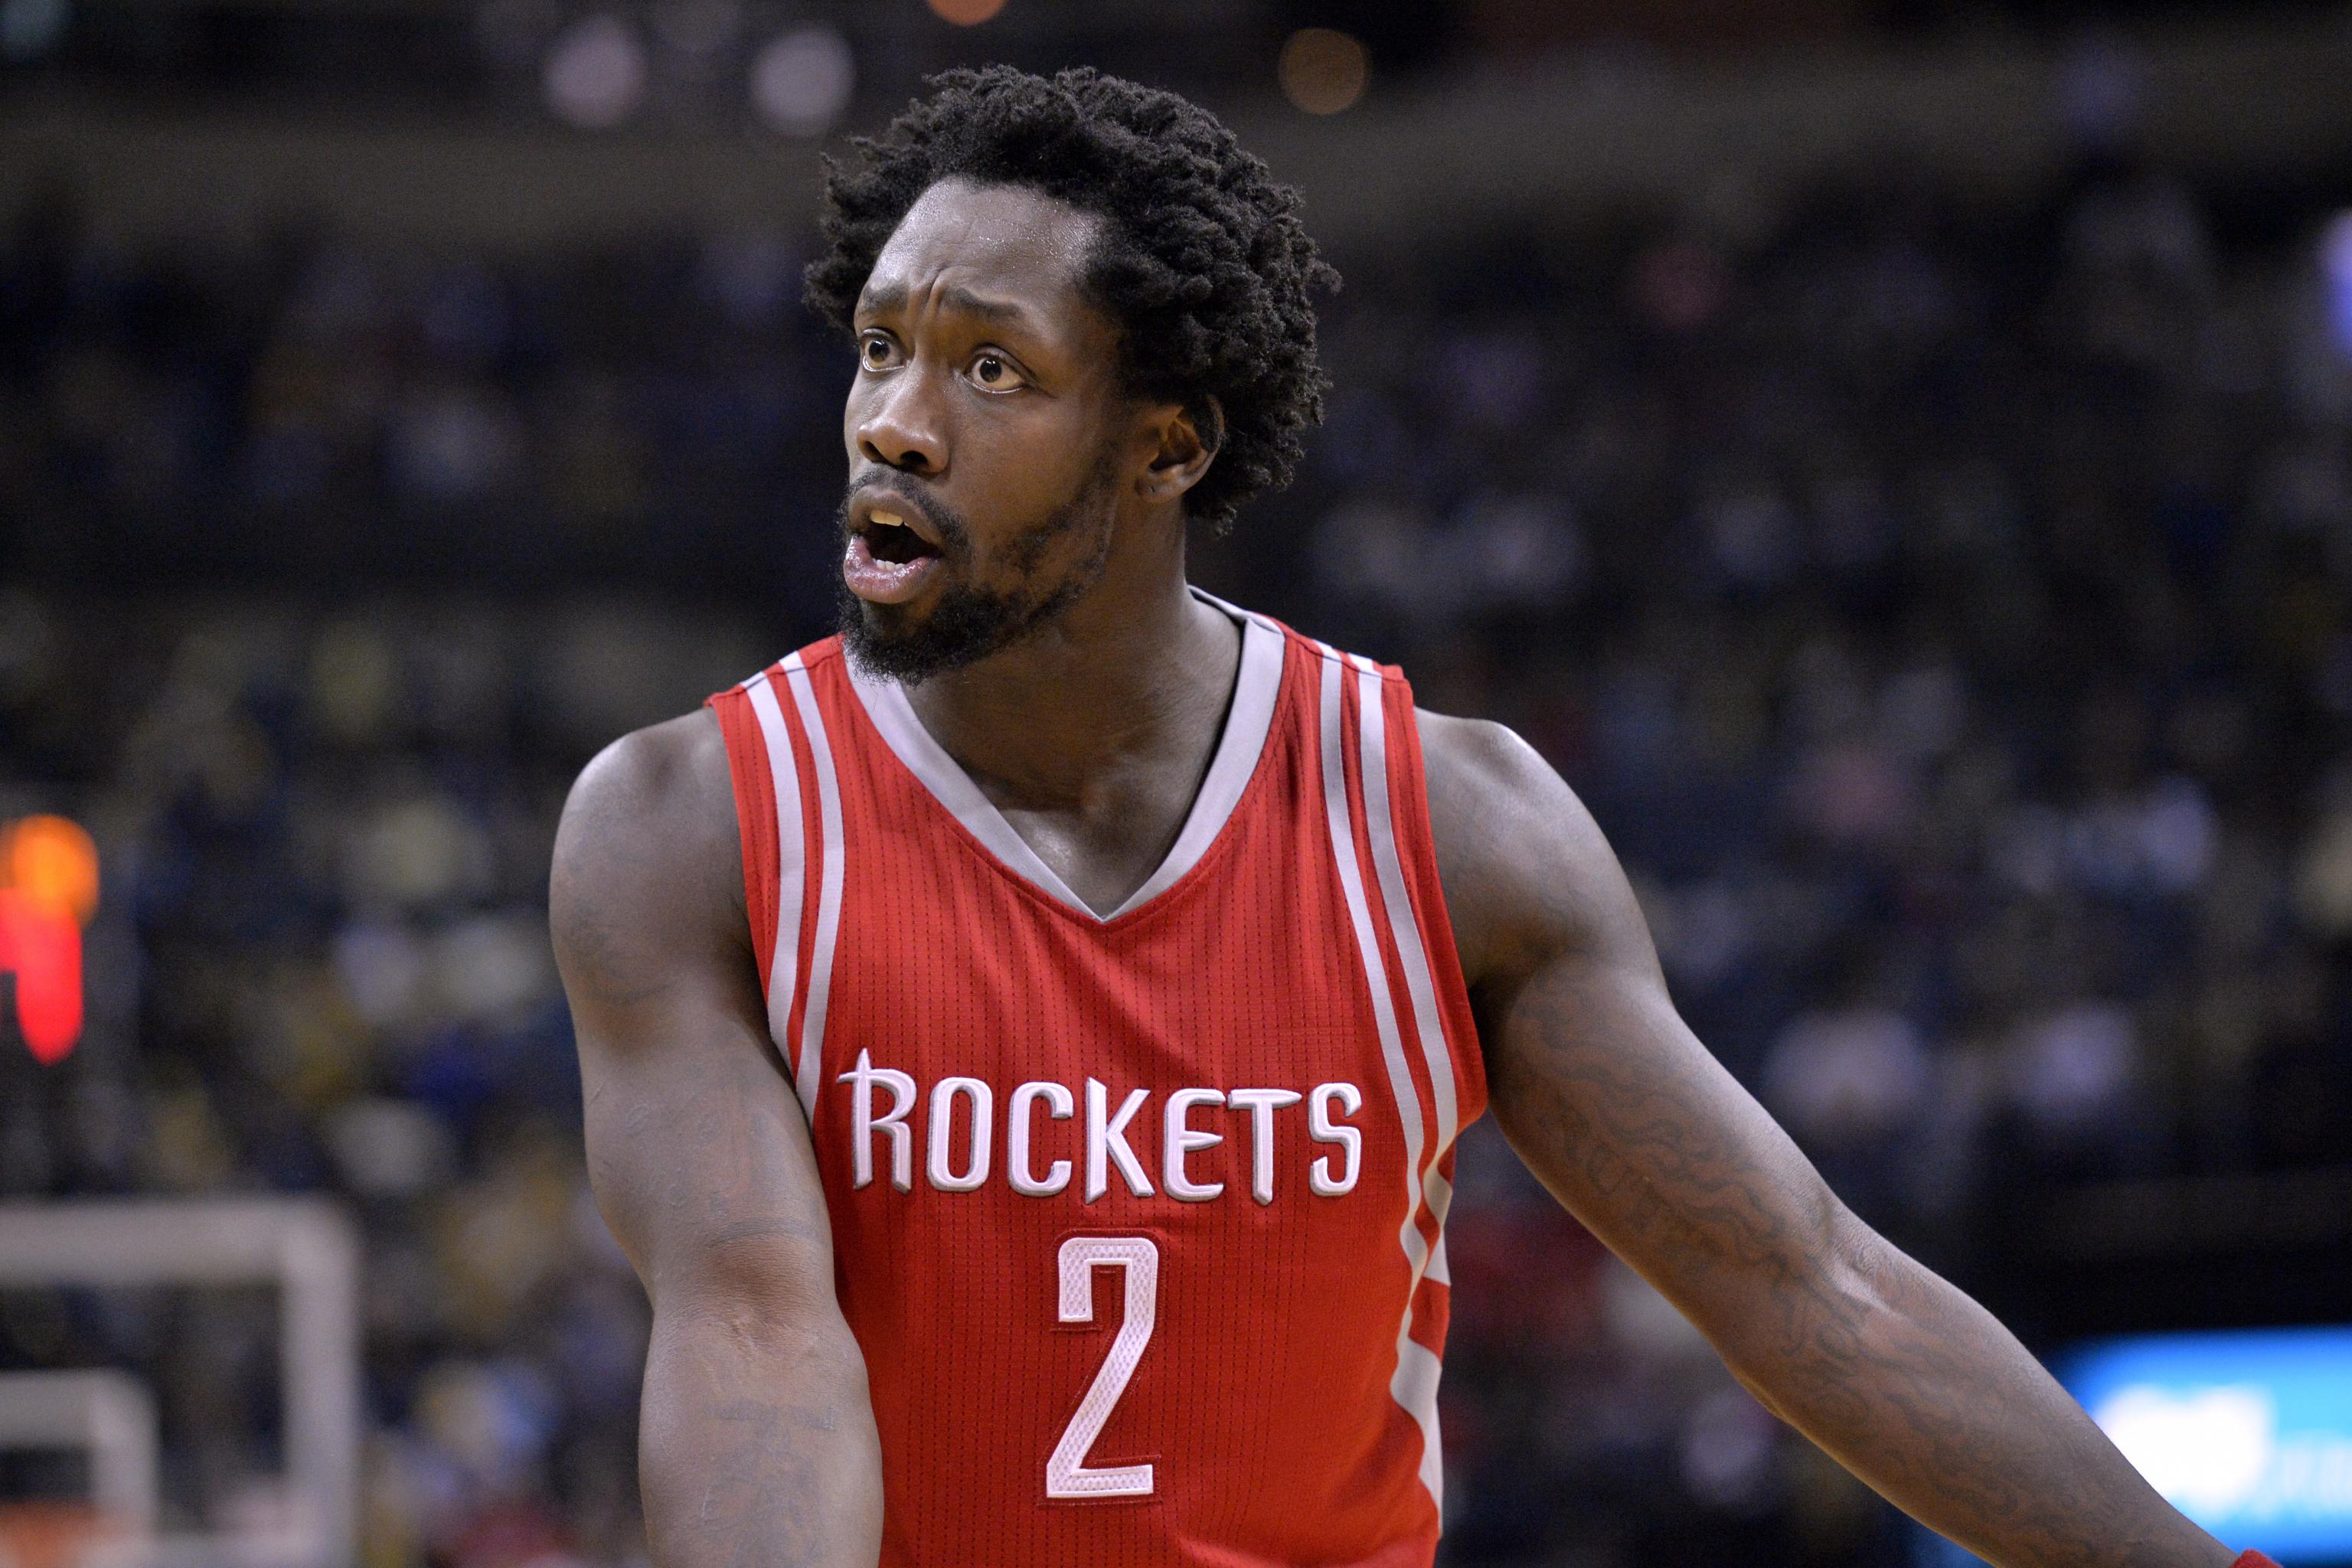 Rockets' Patrick Beverley out with left wrist injury